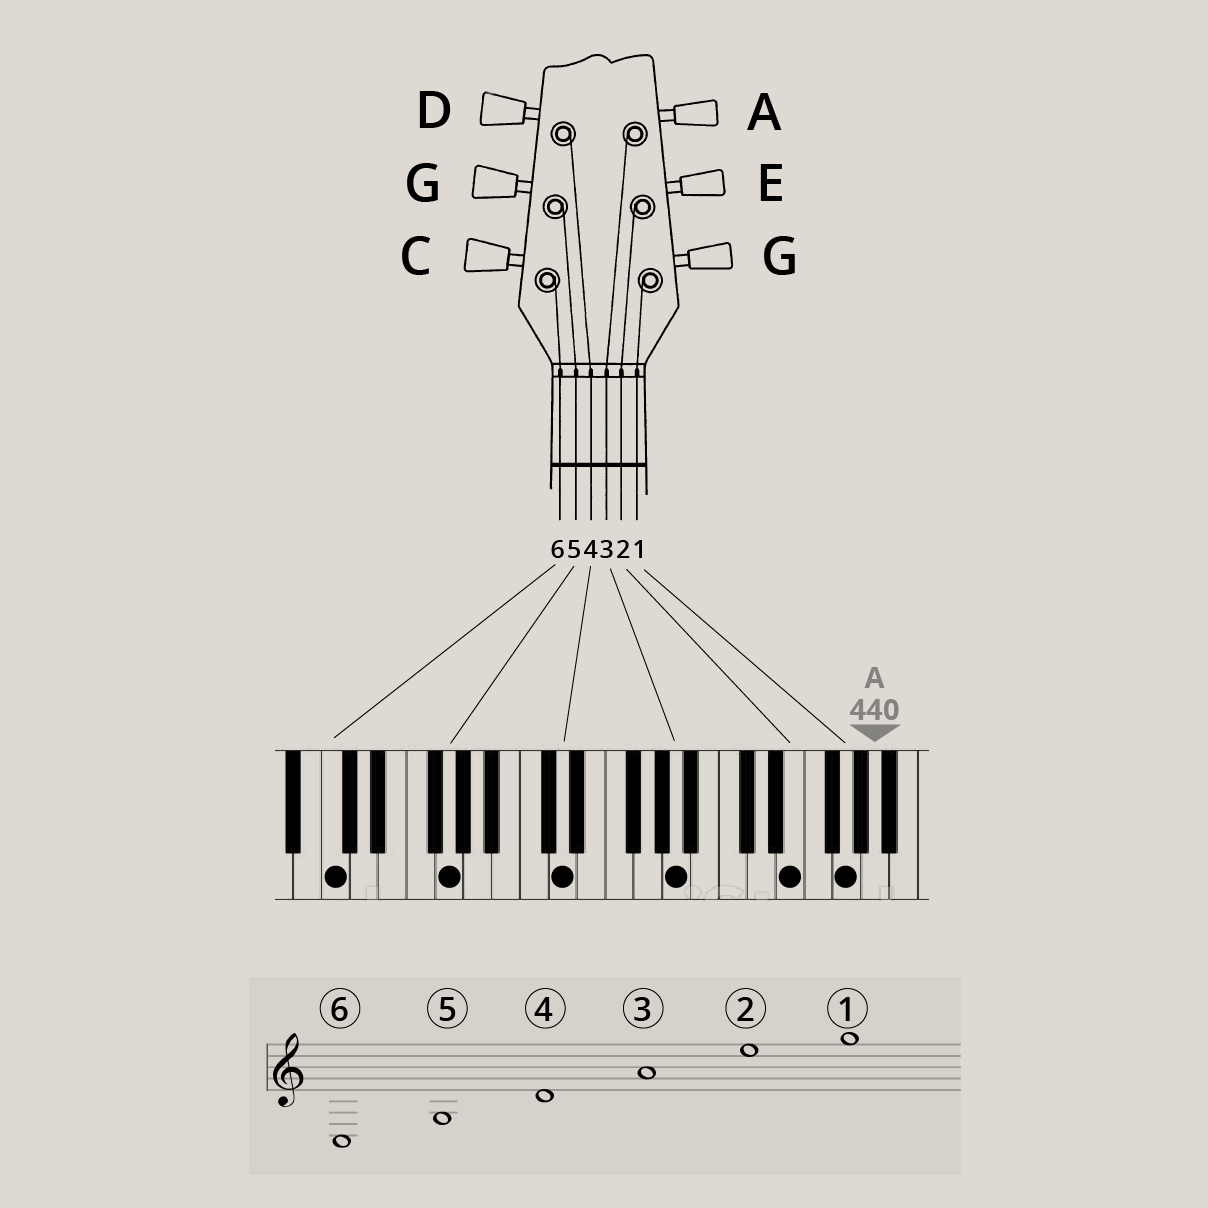 The GC Tuning represented in a score, a piano keyboard and on the guitar itself